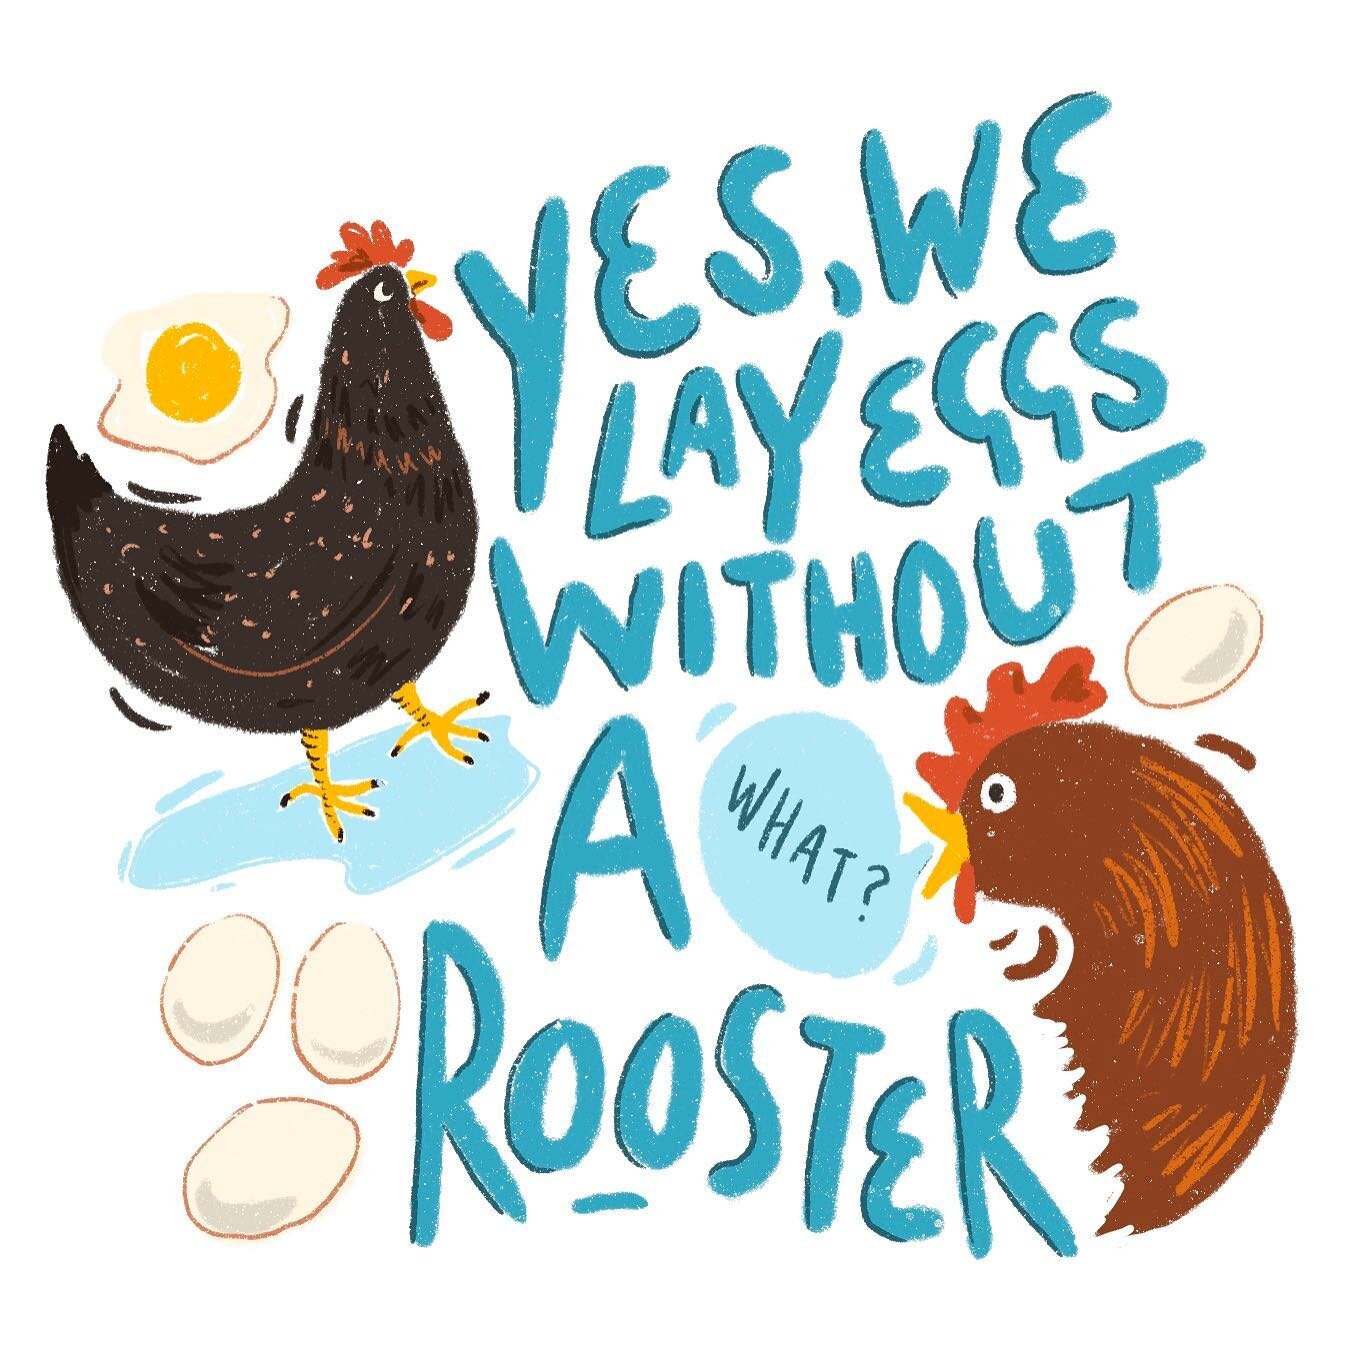 I made this sticker and forgot to post. It cute. Might delete later, idk. 🐔 #dontneednorooster